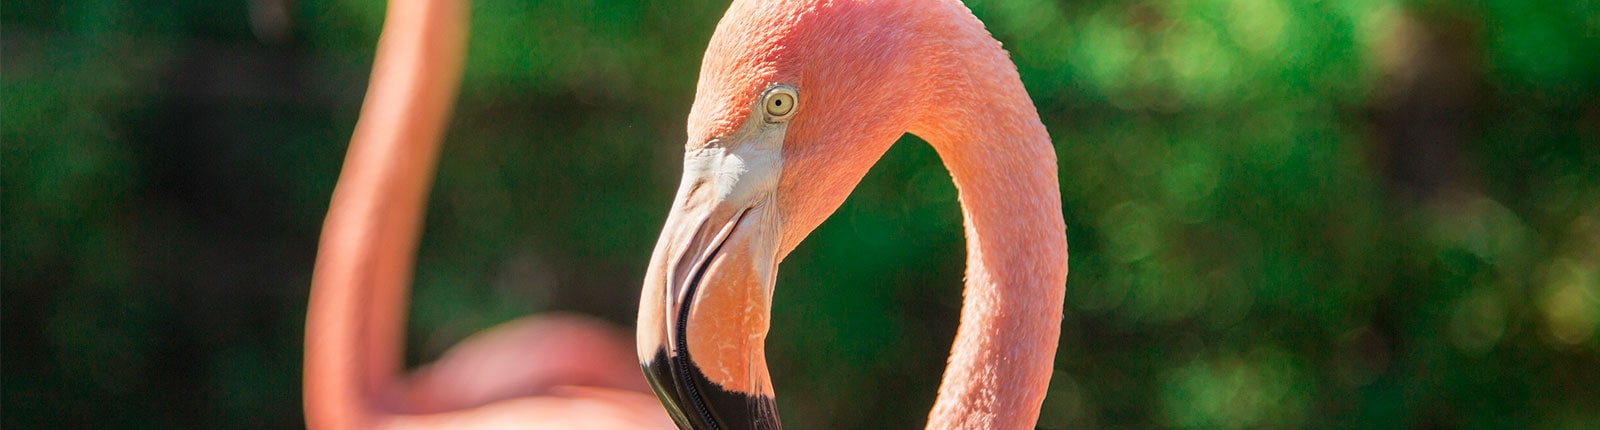 A pink flamingo close-up in Bonaire